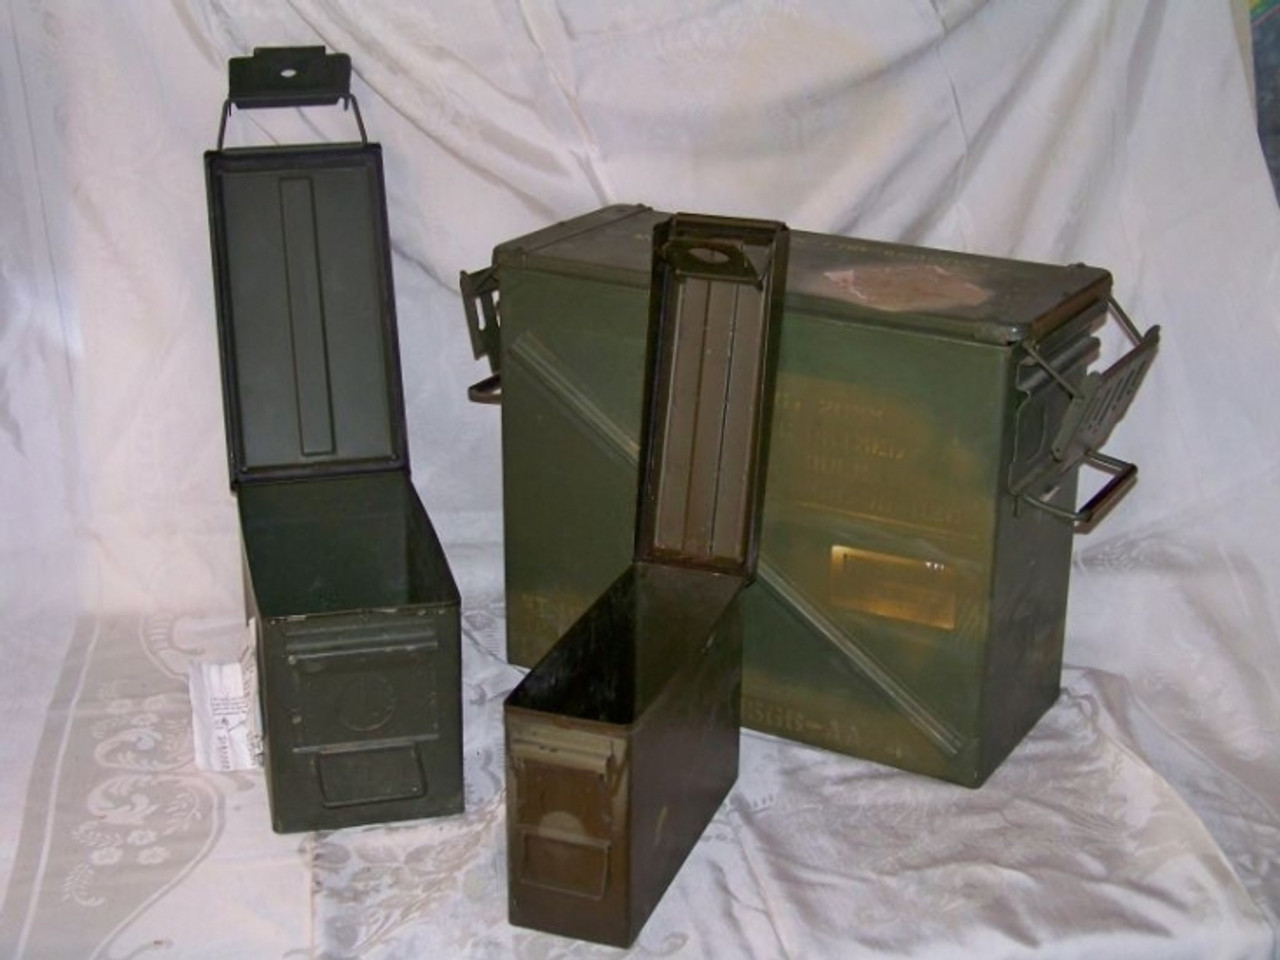 AMMO CAN - Two Birds Outdoors